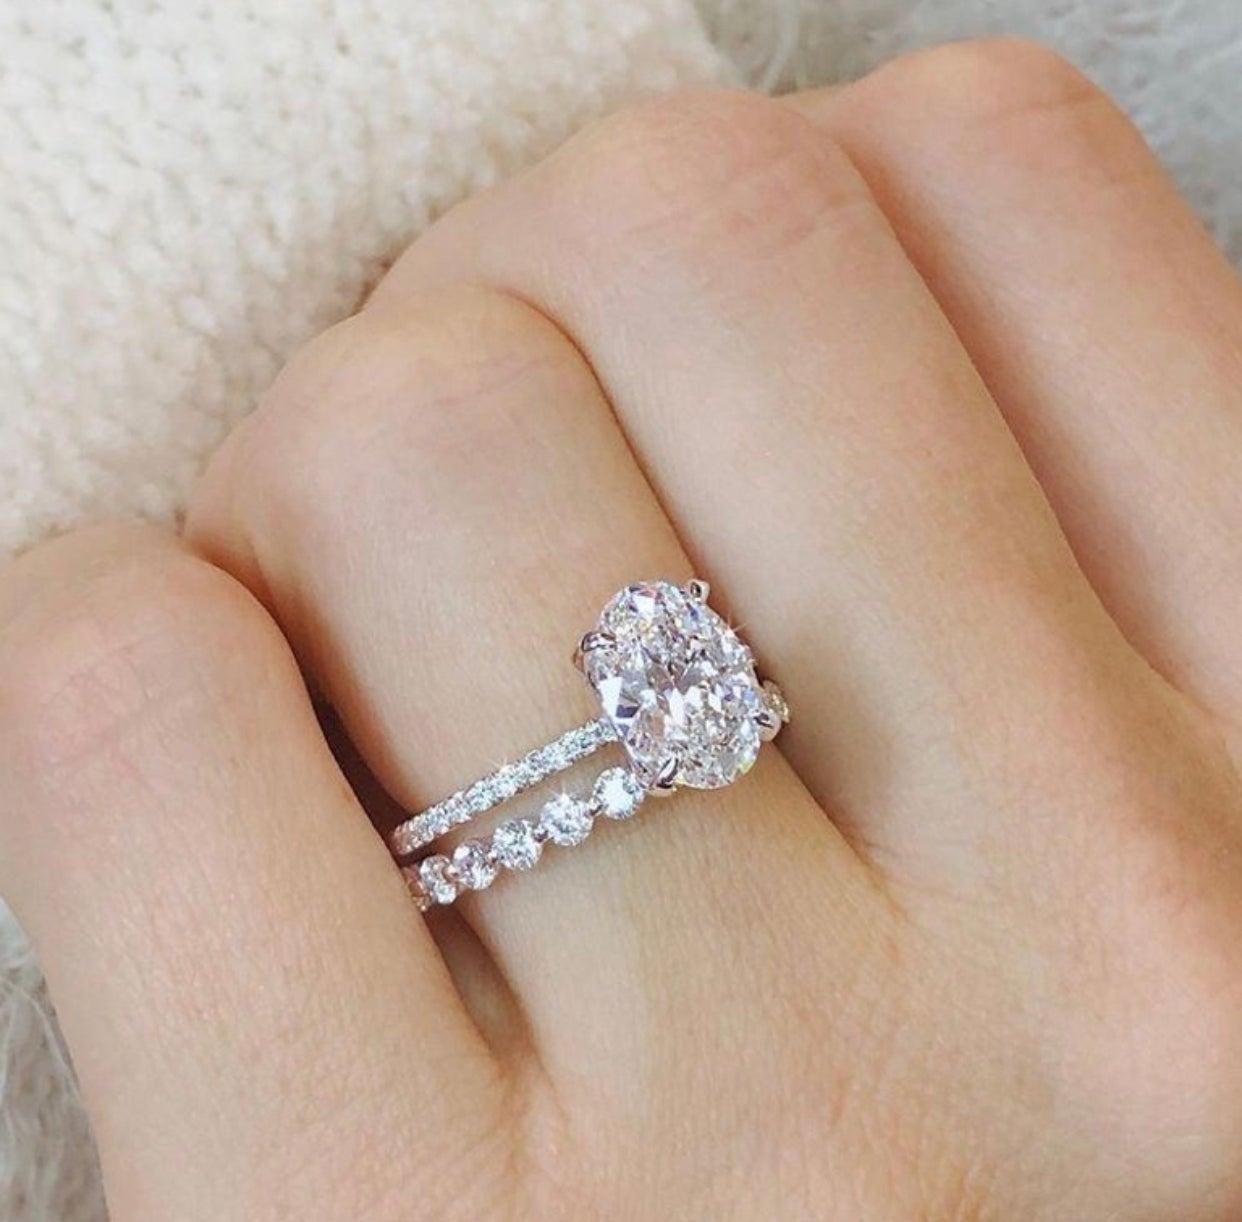 For Sale:  Made to Order GIA Certified Engagement Ring Oval Diamond Cut 4